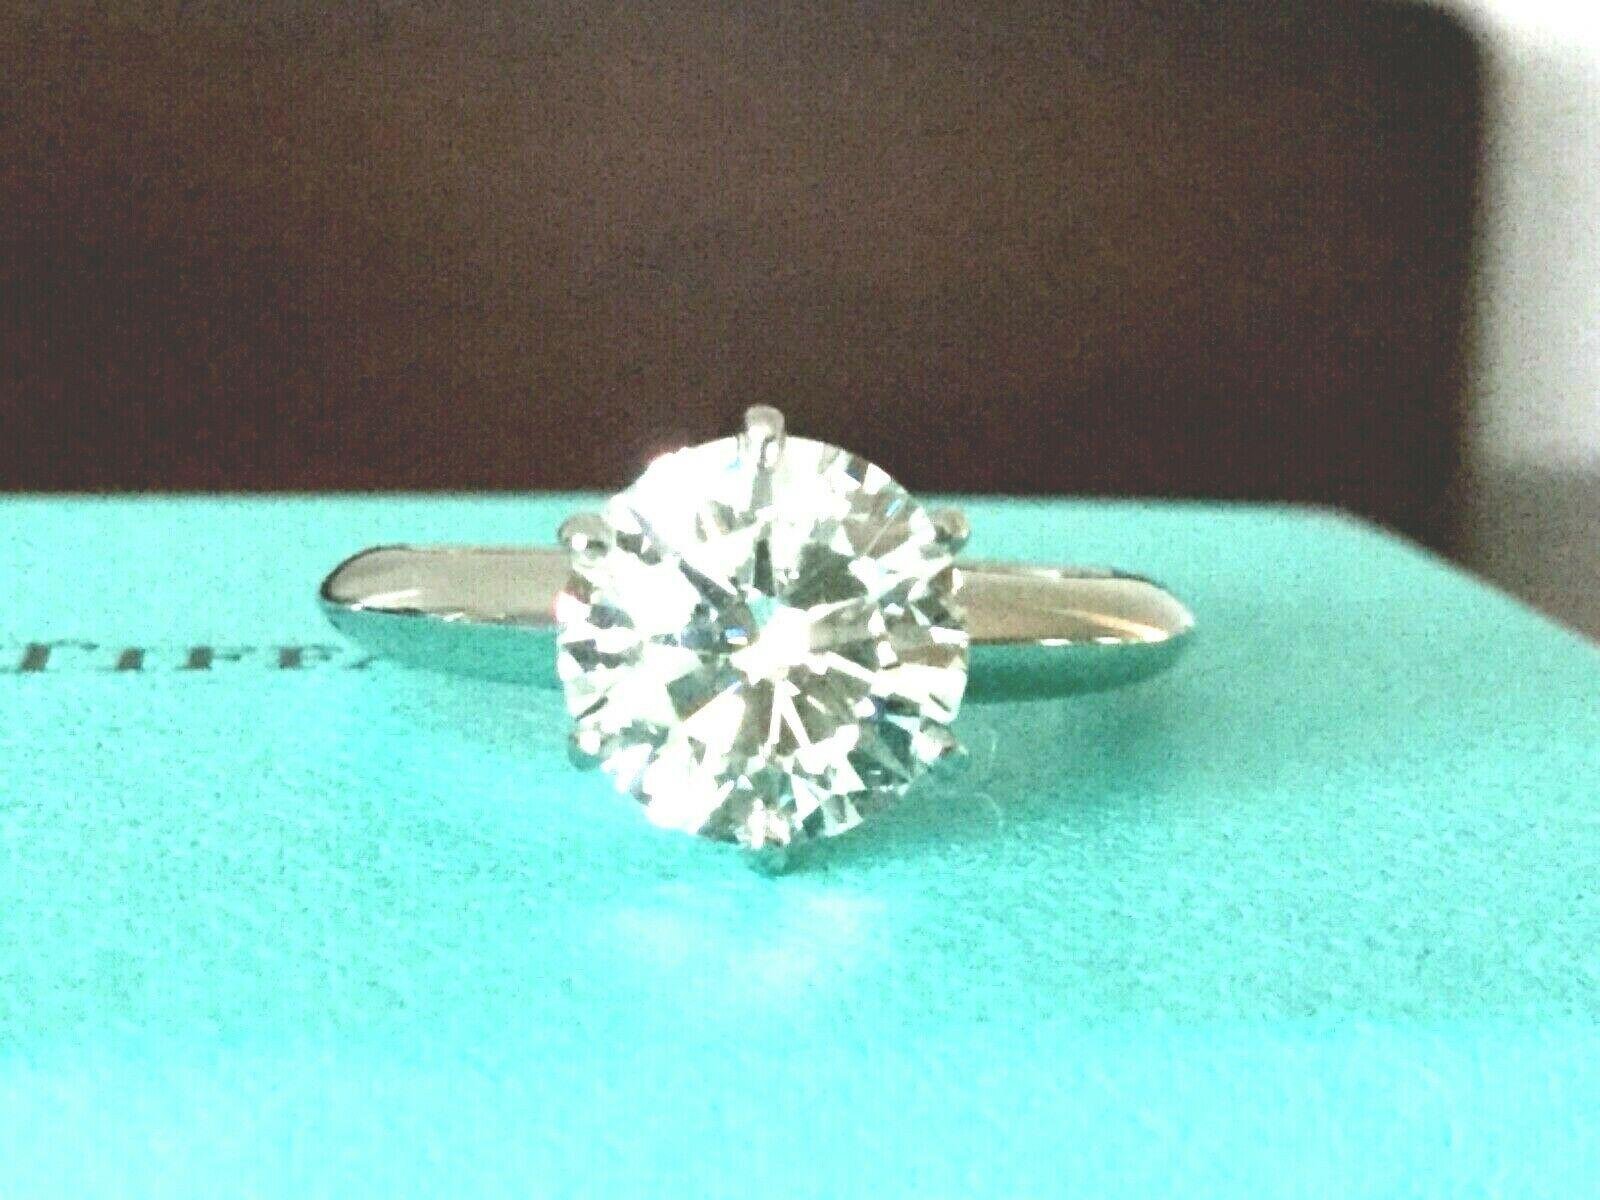 Being offered for your consideration is a like new Tiffany & Co Platinum and Diamond 1.71 carat natural round engagement ring set in the classic 6 prong setting.  

This stunning diamond looks HUGE, Super White and Super Fiery - it is a magnificent